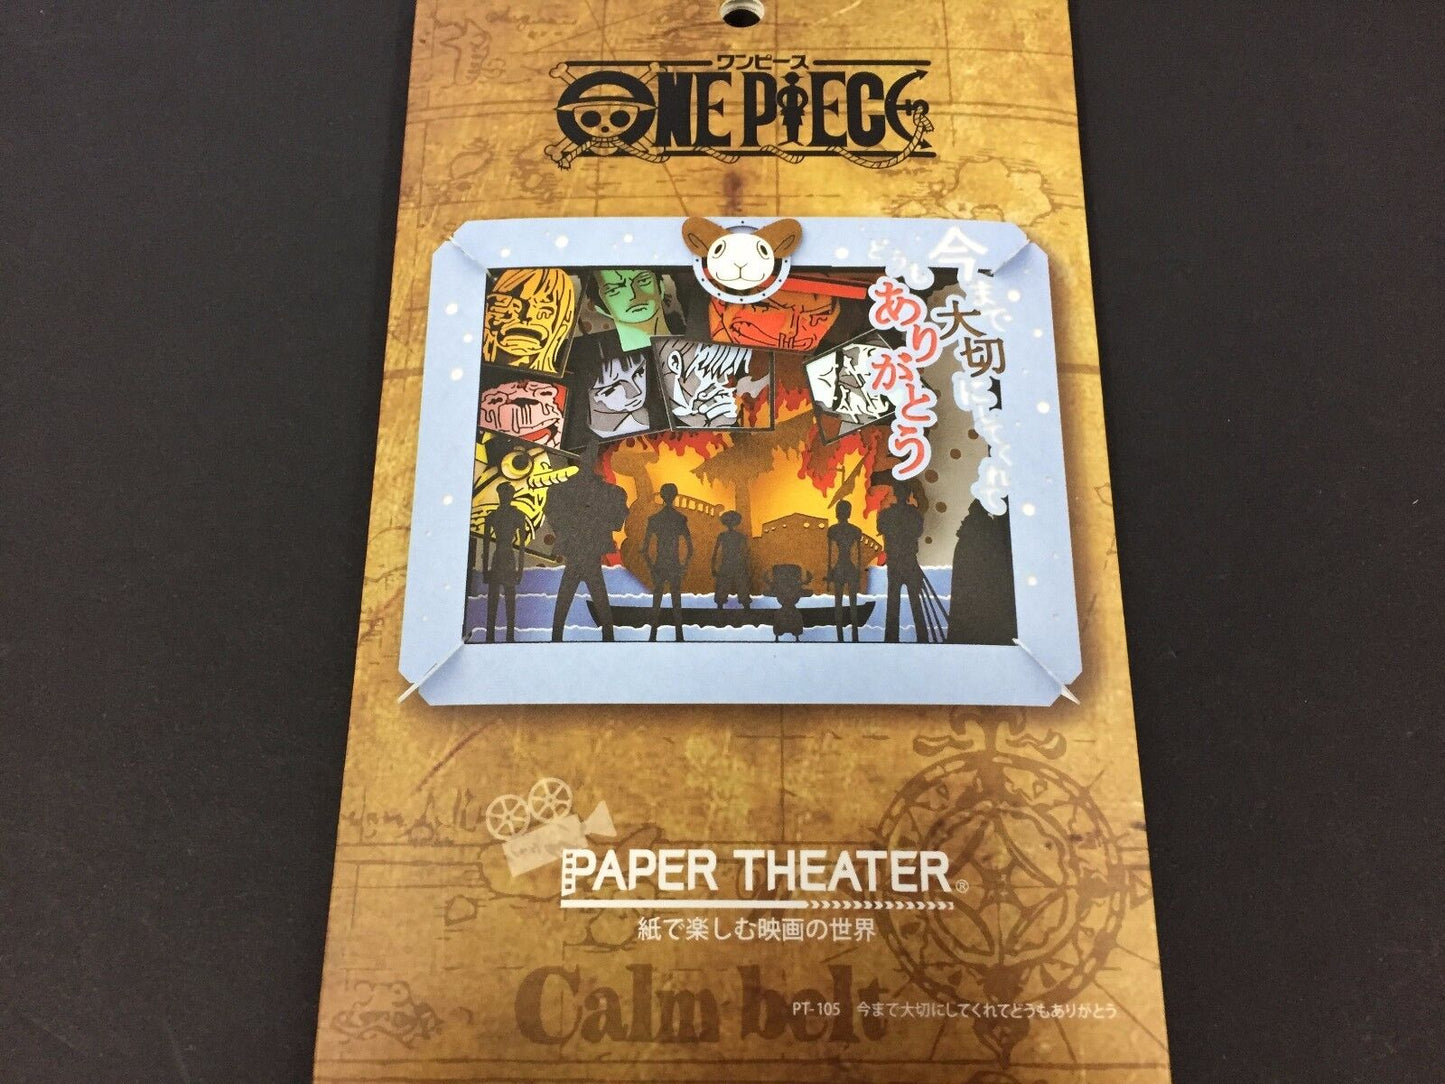 Paper Theater One Piece - Going Merry (Thank You For Taking Care Of Me Until Now)